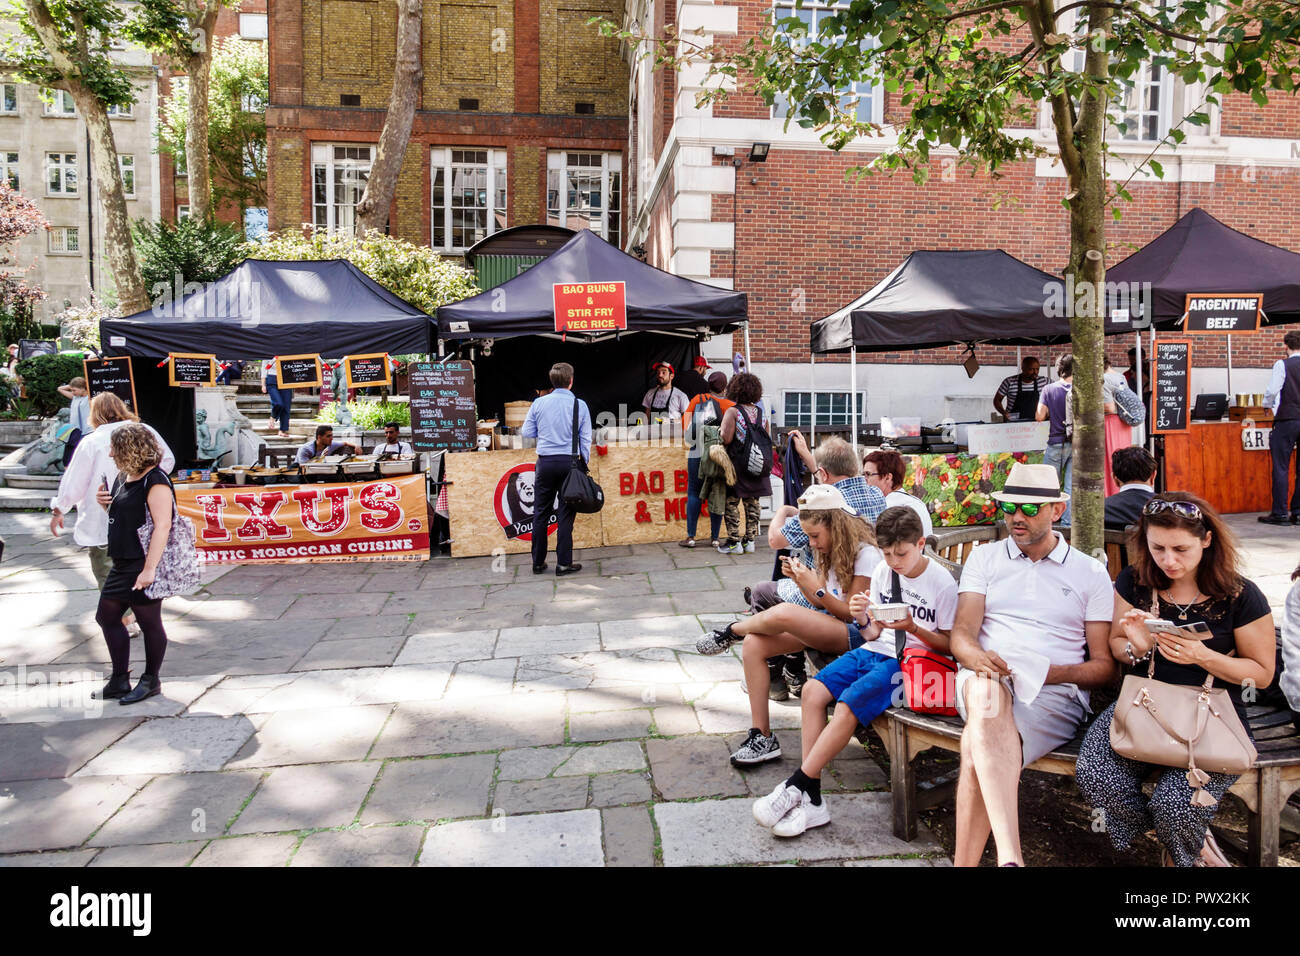 London England,UK,West End St James's Piccadilly Church,St James-in-the-Fields,Anglican Church parish,exterior,Market,food vendor stall,man men male,w Stock Photo